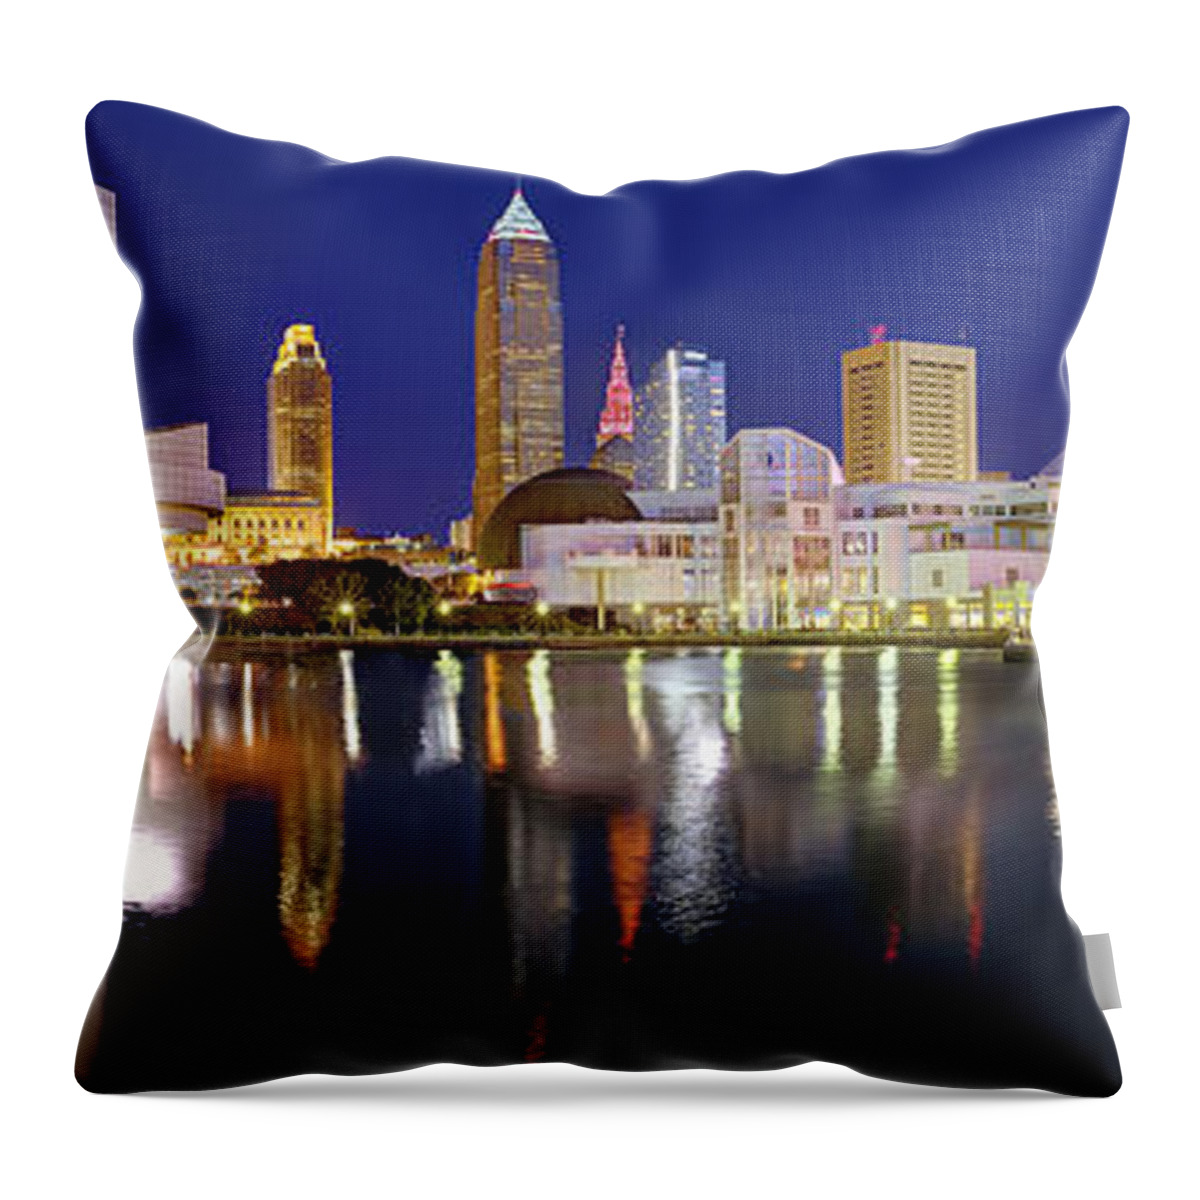 Cleveland Skyline Throw Pillow featuring the photograph Cleveland Skyline at Dusk Rock Roll Hall Fame by Jon Holiday